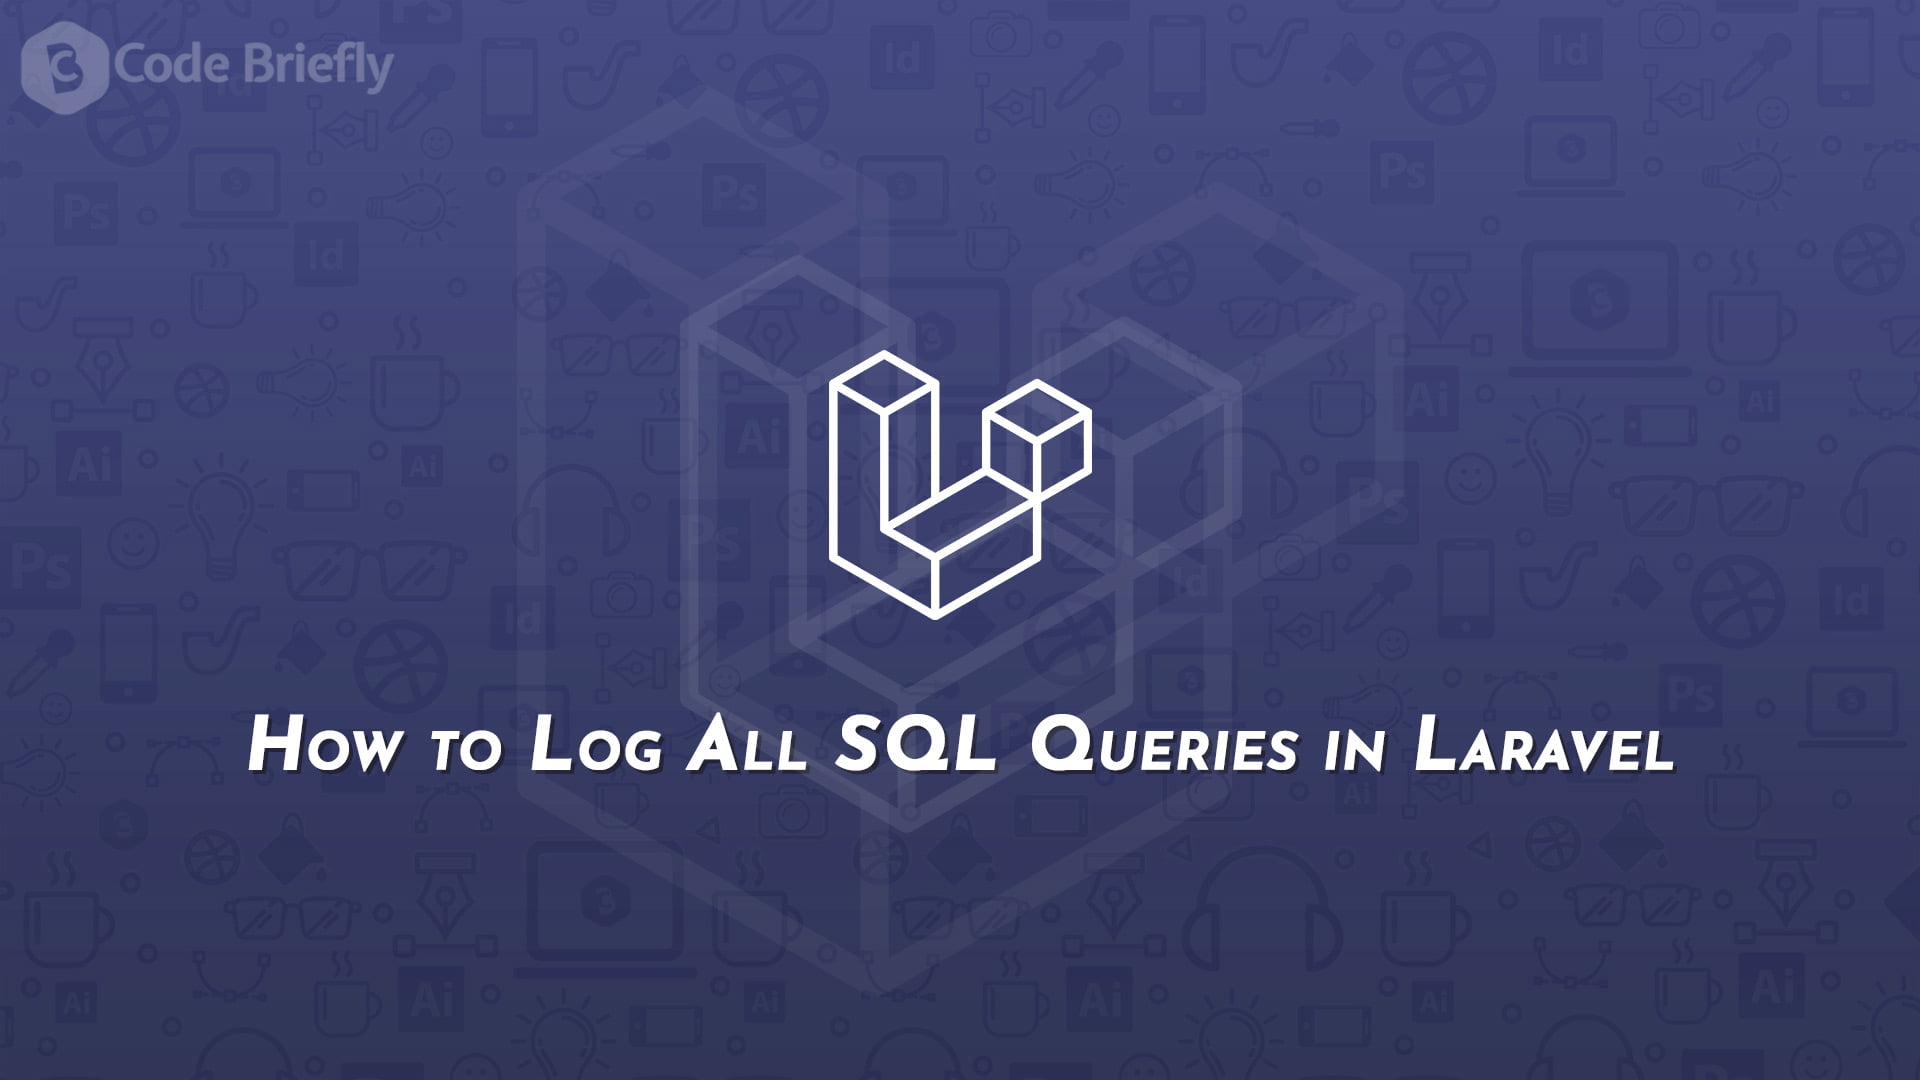 How to Log All SQL Queries in Laravel